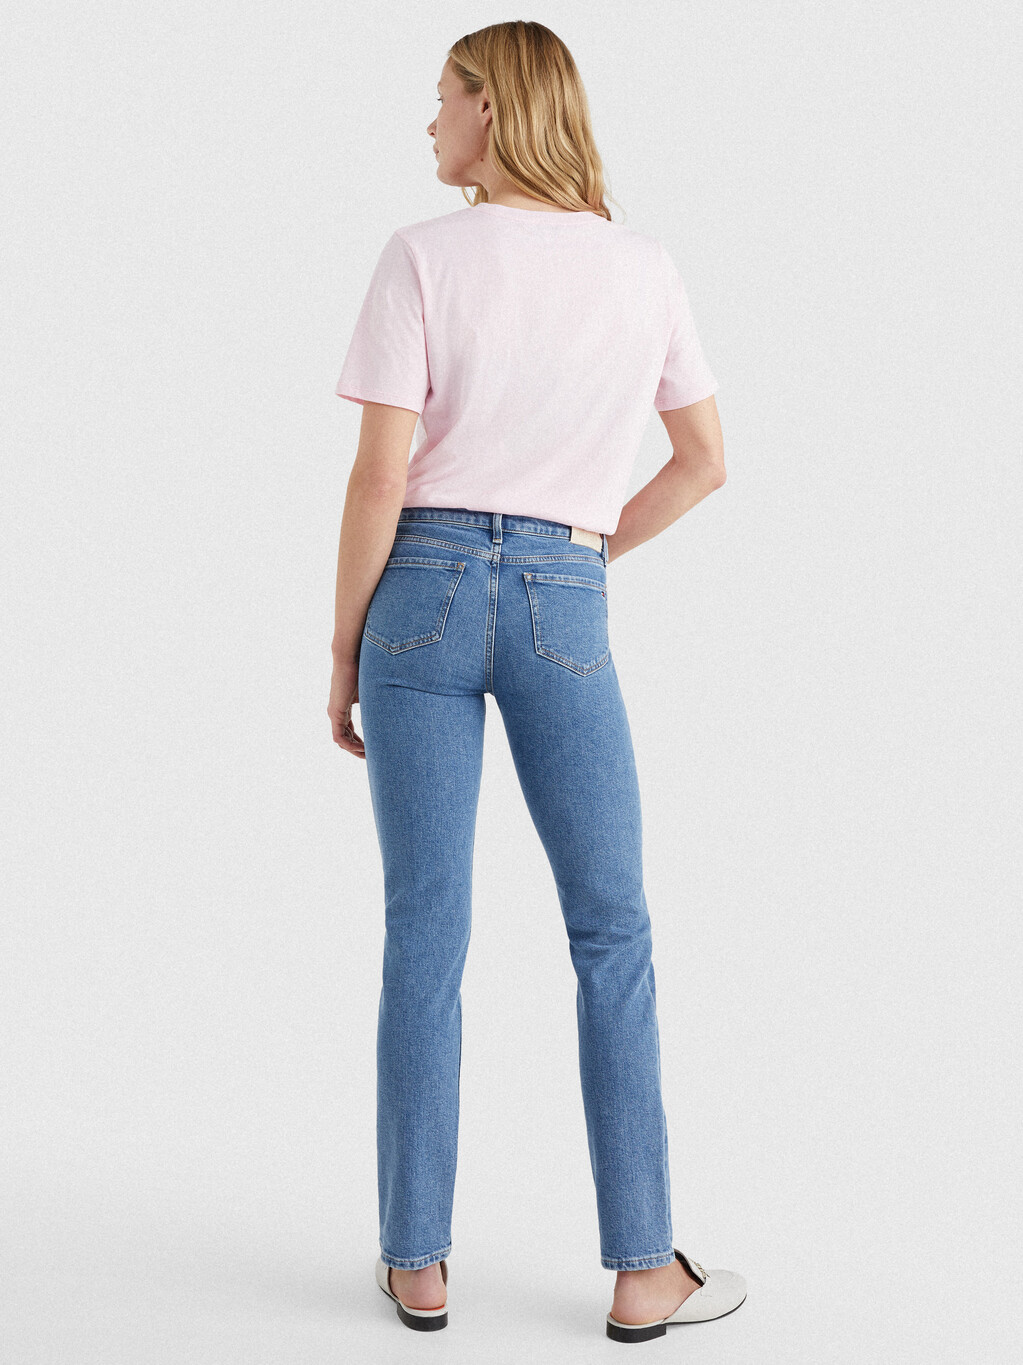 Buy ROME MID RISE STRAIGHT FADED JEANS in color BLUE